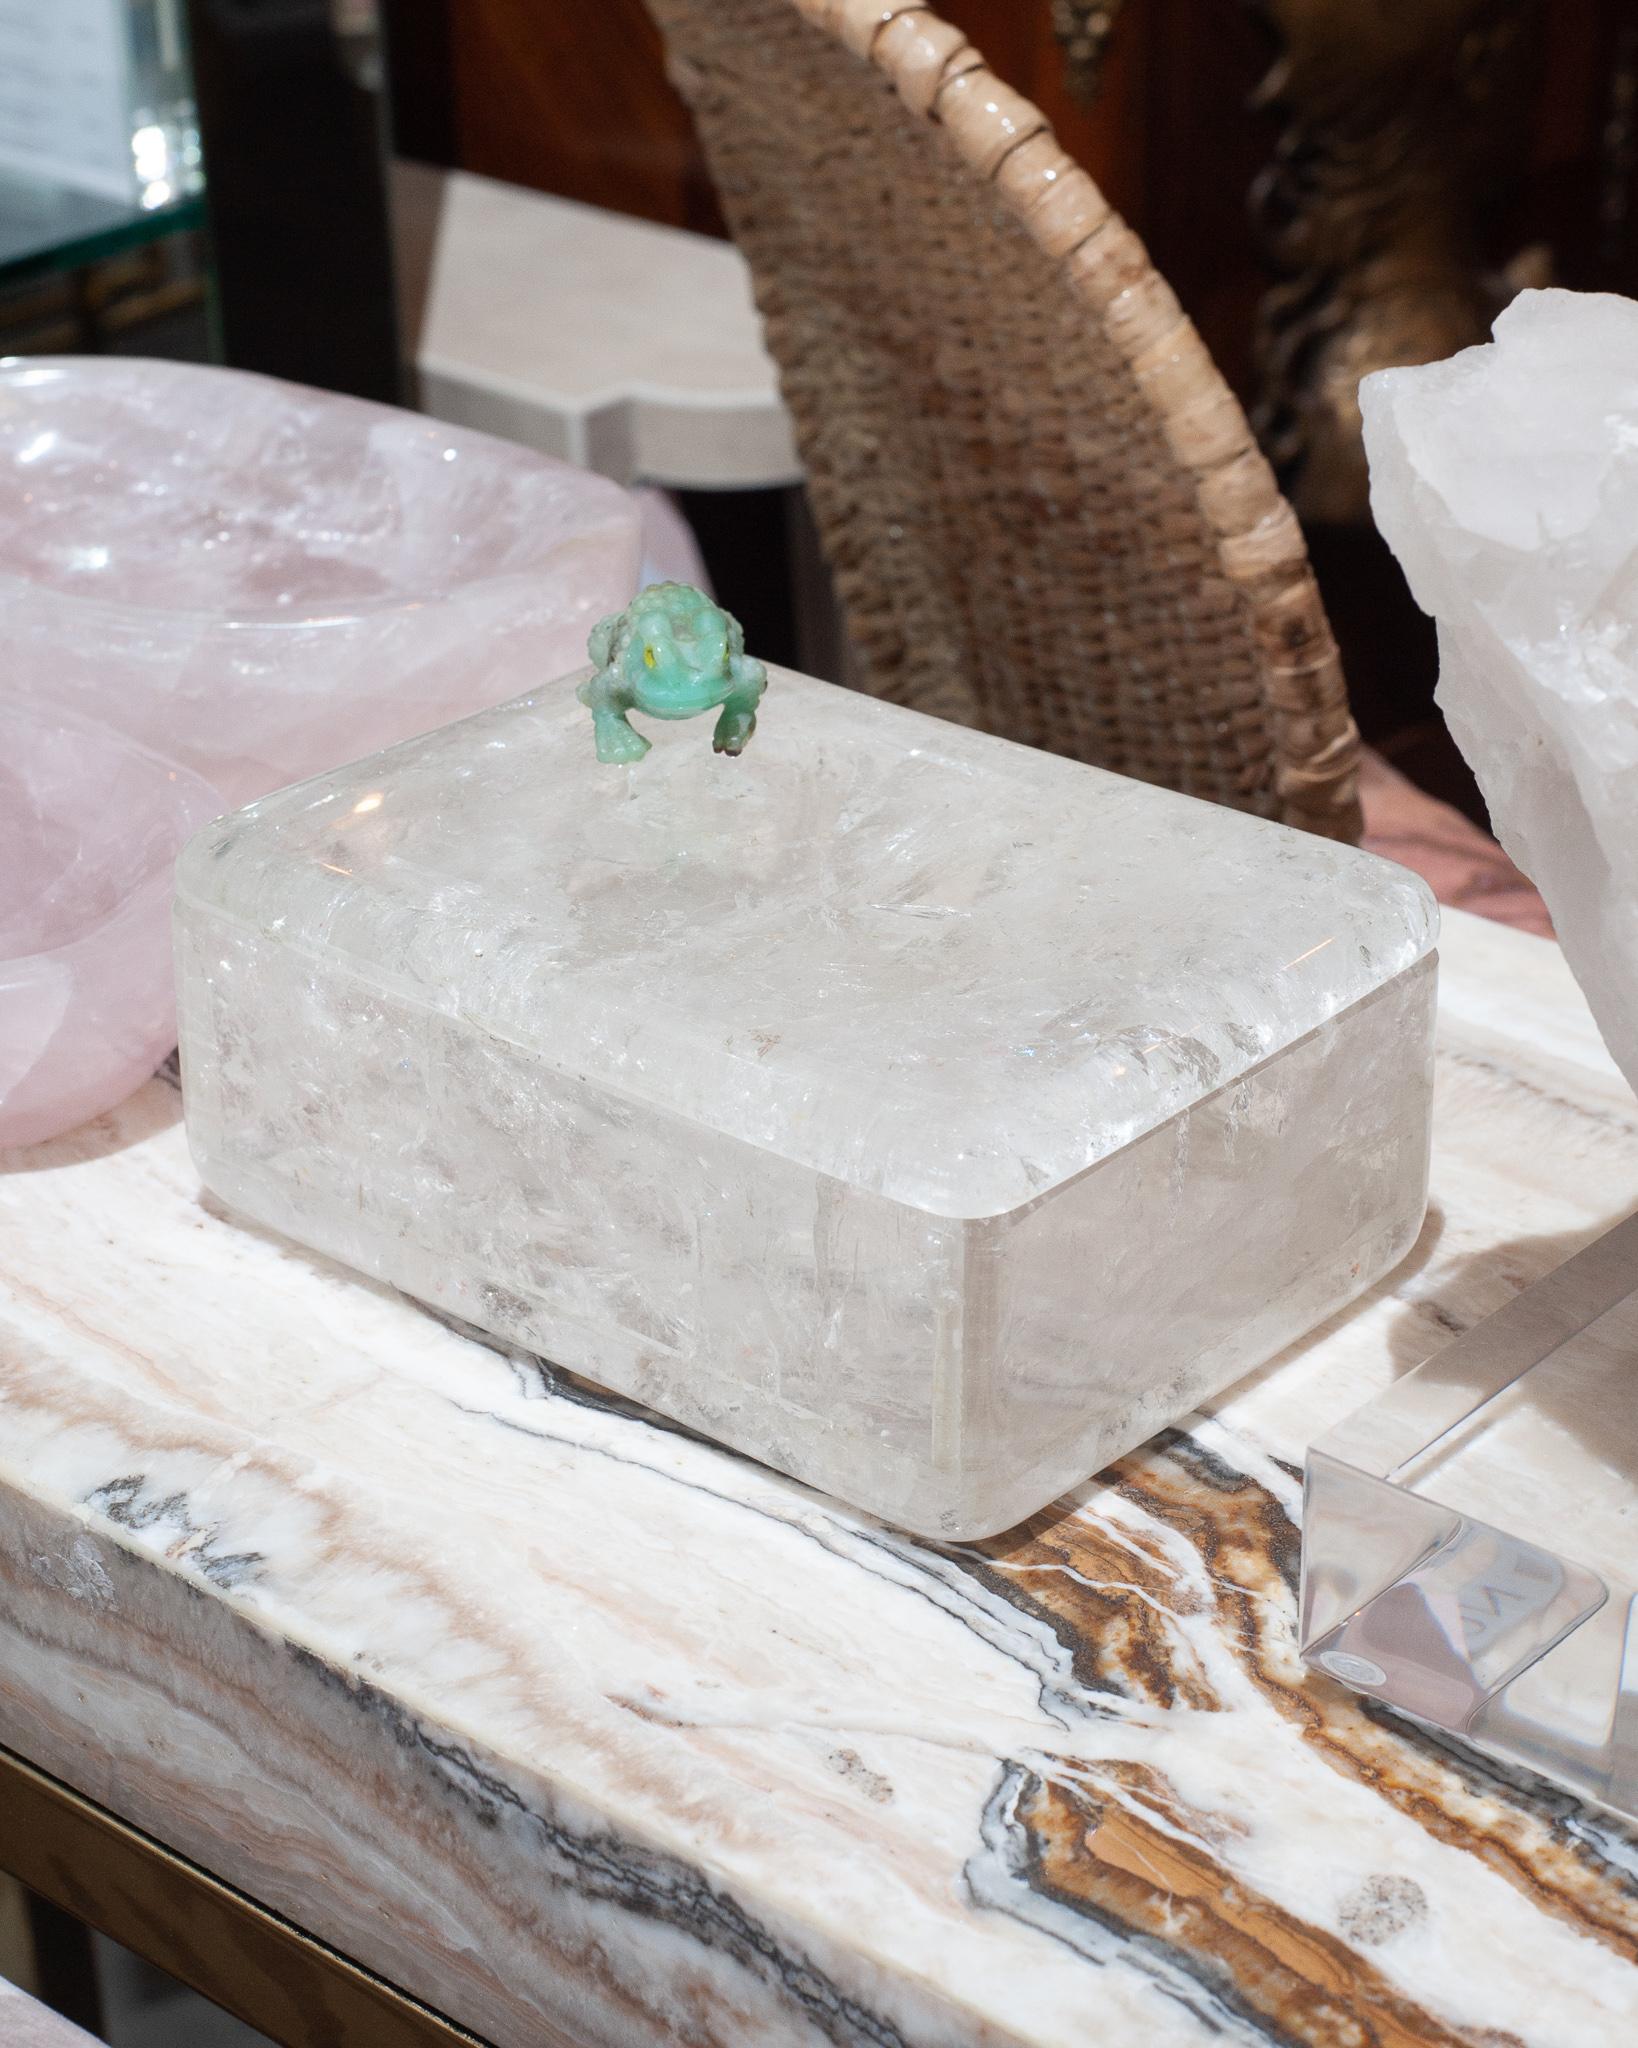 A gorgeous clear quartz / rock crystal box with green aventurine carved frog lid by Studio Maison Nurita. Unusual and whimsical - this box boasts an incredibly clear quality of quartz / rock crystal sourced directly from gem-rich Brazil. The